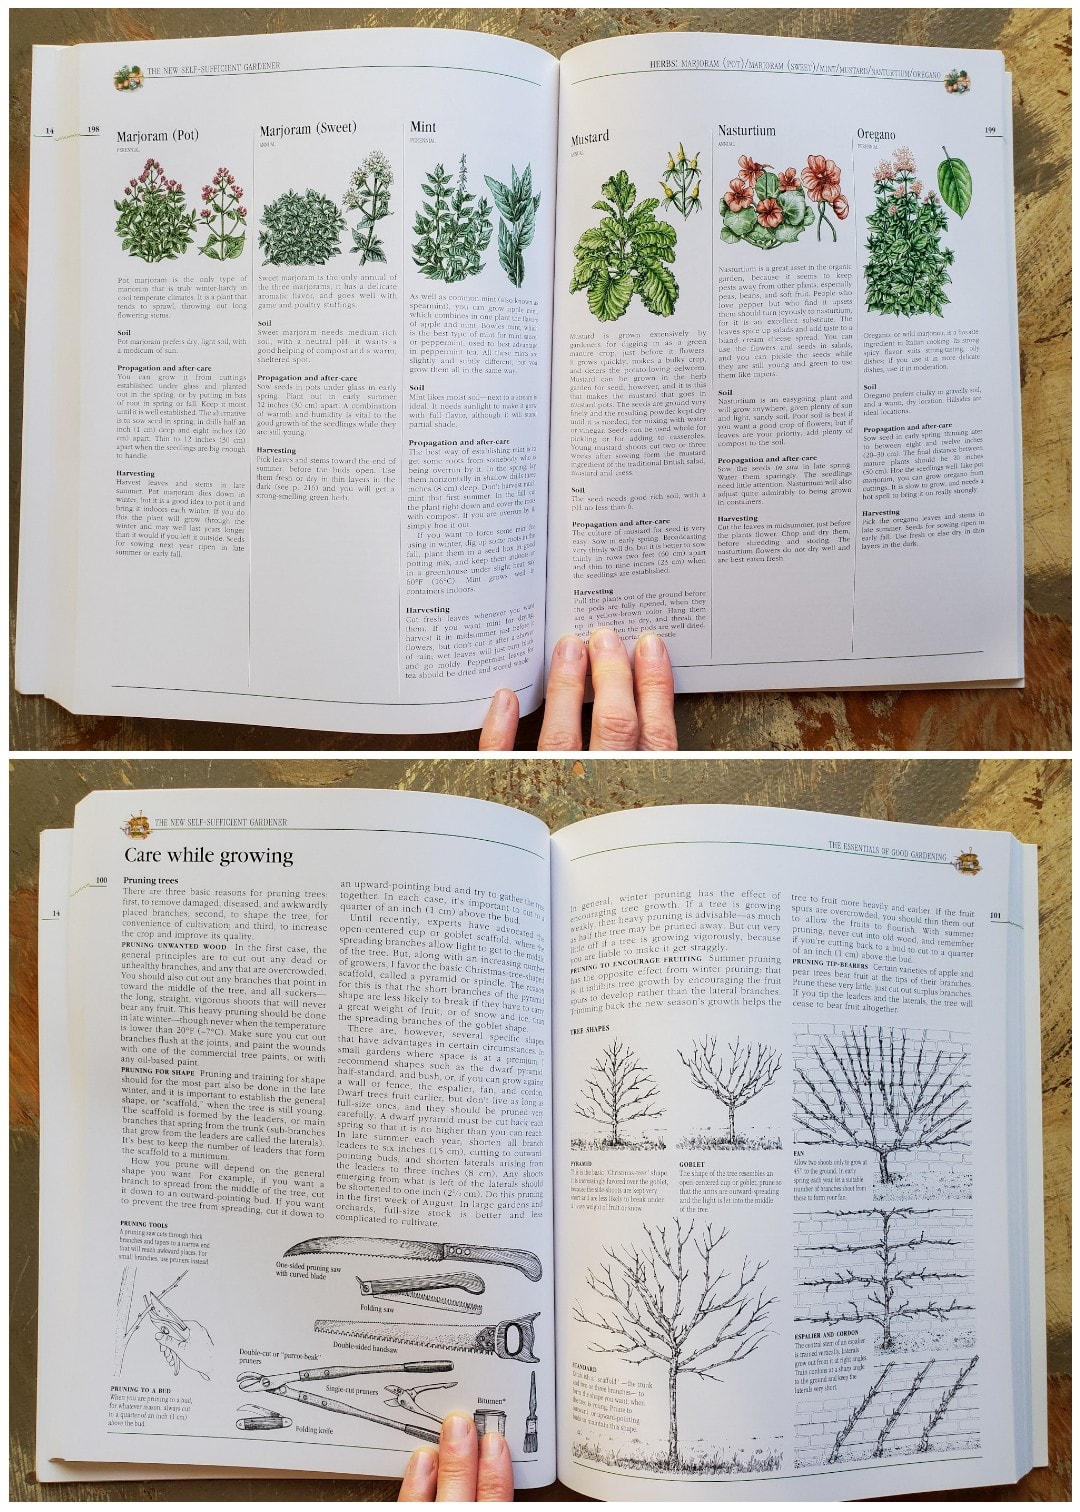 A two page image collage, the first image shows the inside of a book that is describing different types of herbs, from marjoram to mustard and nasturtium. The second image shows the same book open to a different page that shows different types of pruning techniques along with the various tools used for the job. 